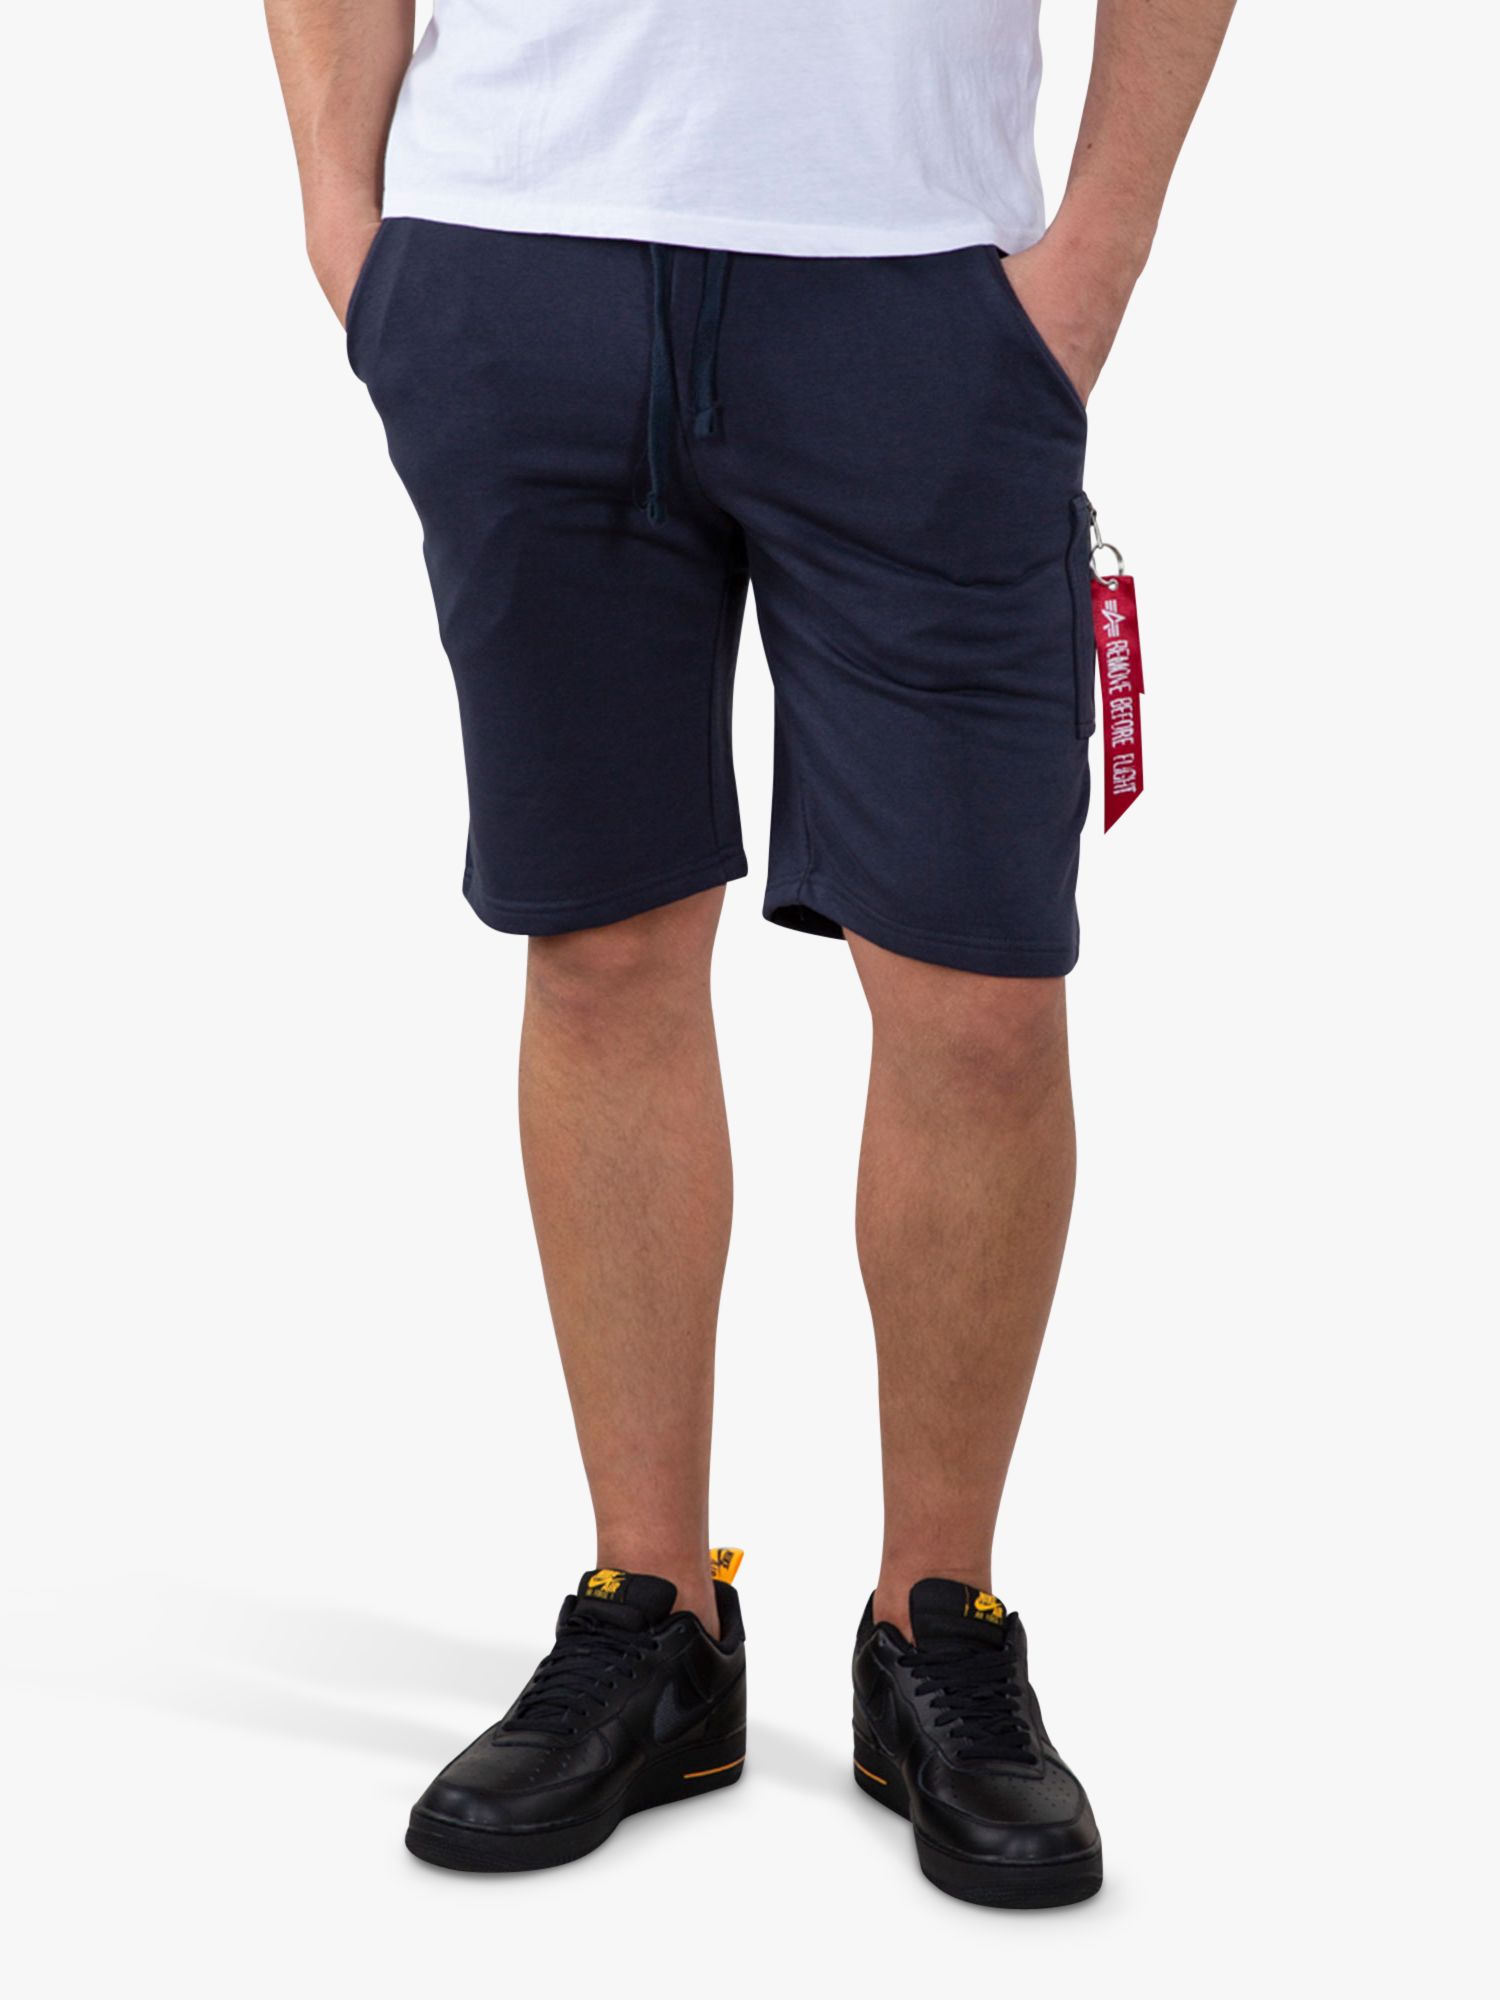 Partners Lewis Cargo Sweat John Shorts, Blue at Industries X-Fit Rep 07 Alpha &